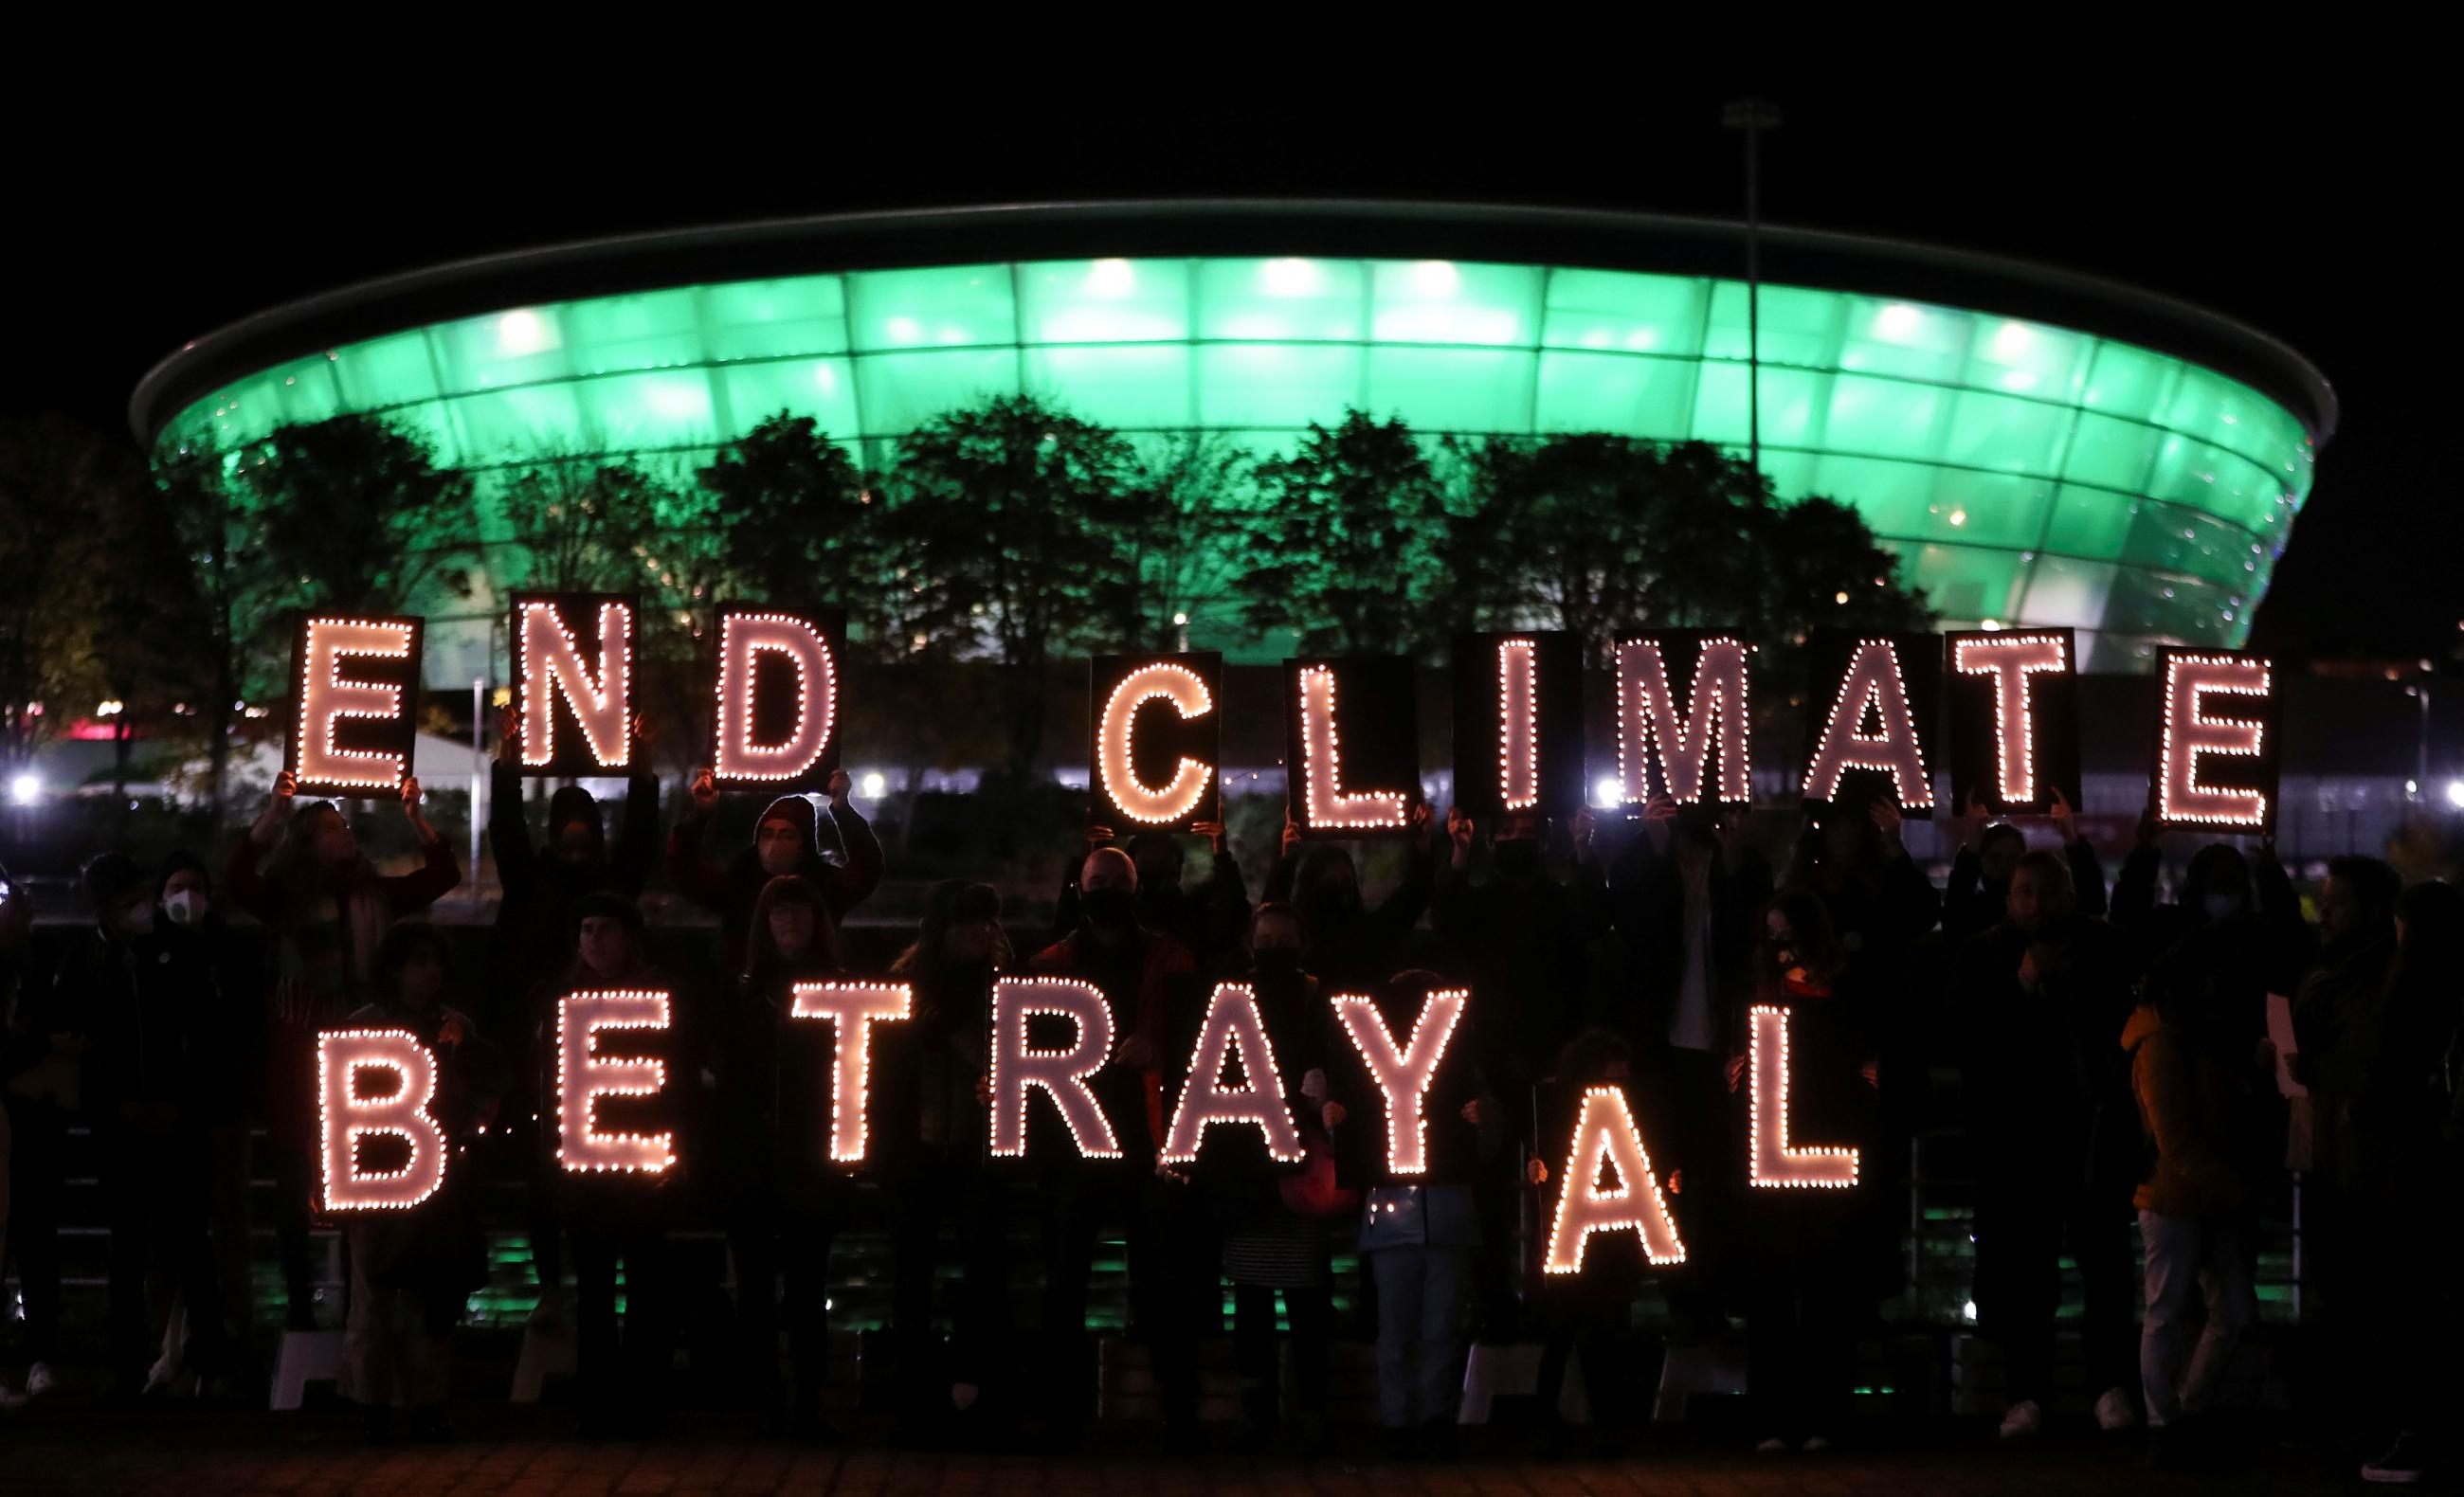 Climate youth activists display a message during a protest opposite the venue for the UN Climate Change Conference (COP26) in Glasgow, Scotland, Britain November 2, 202